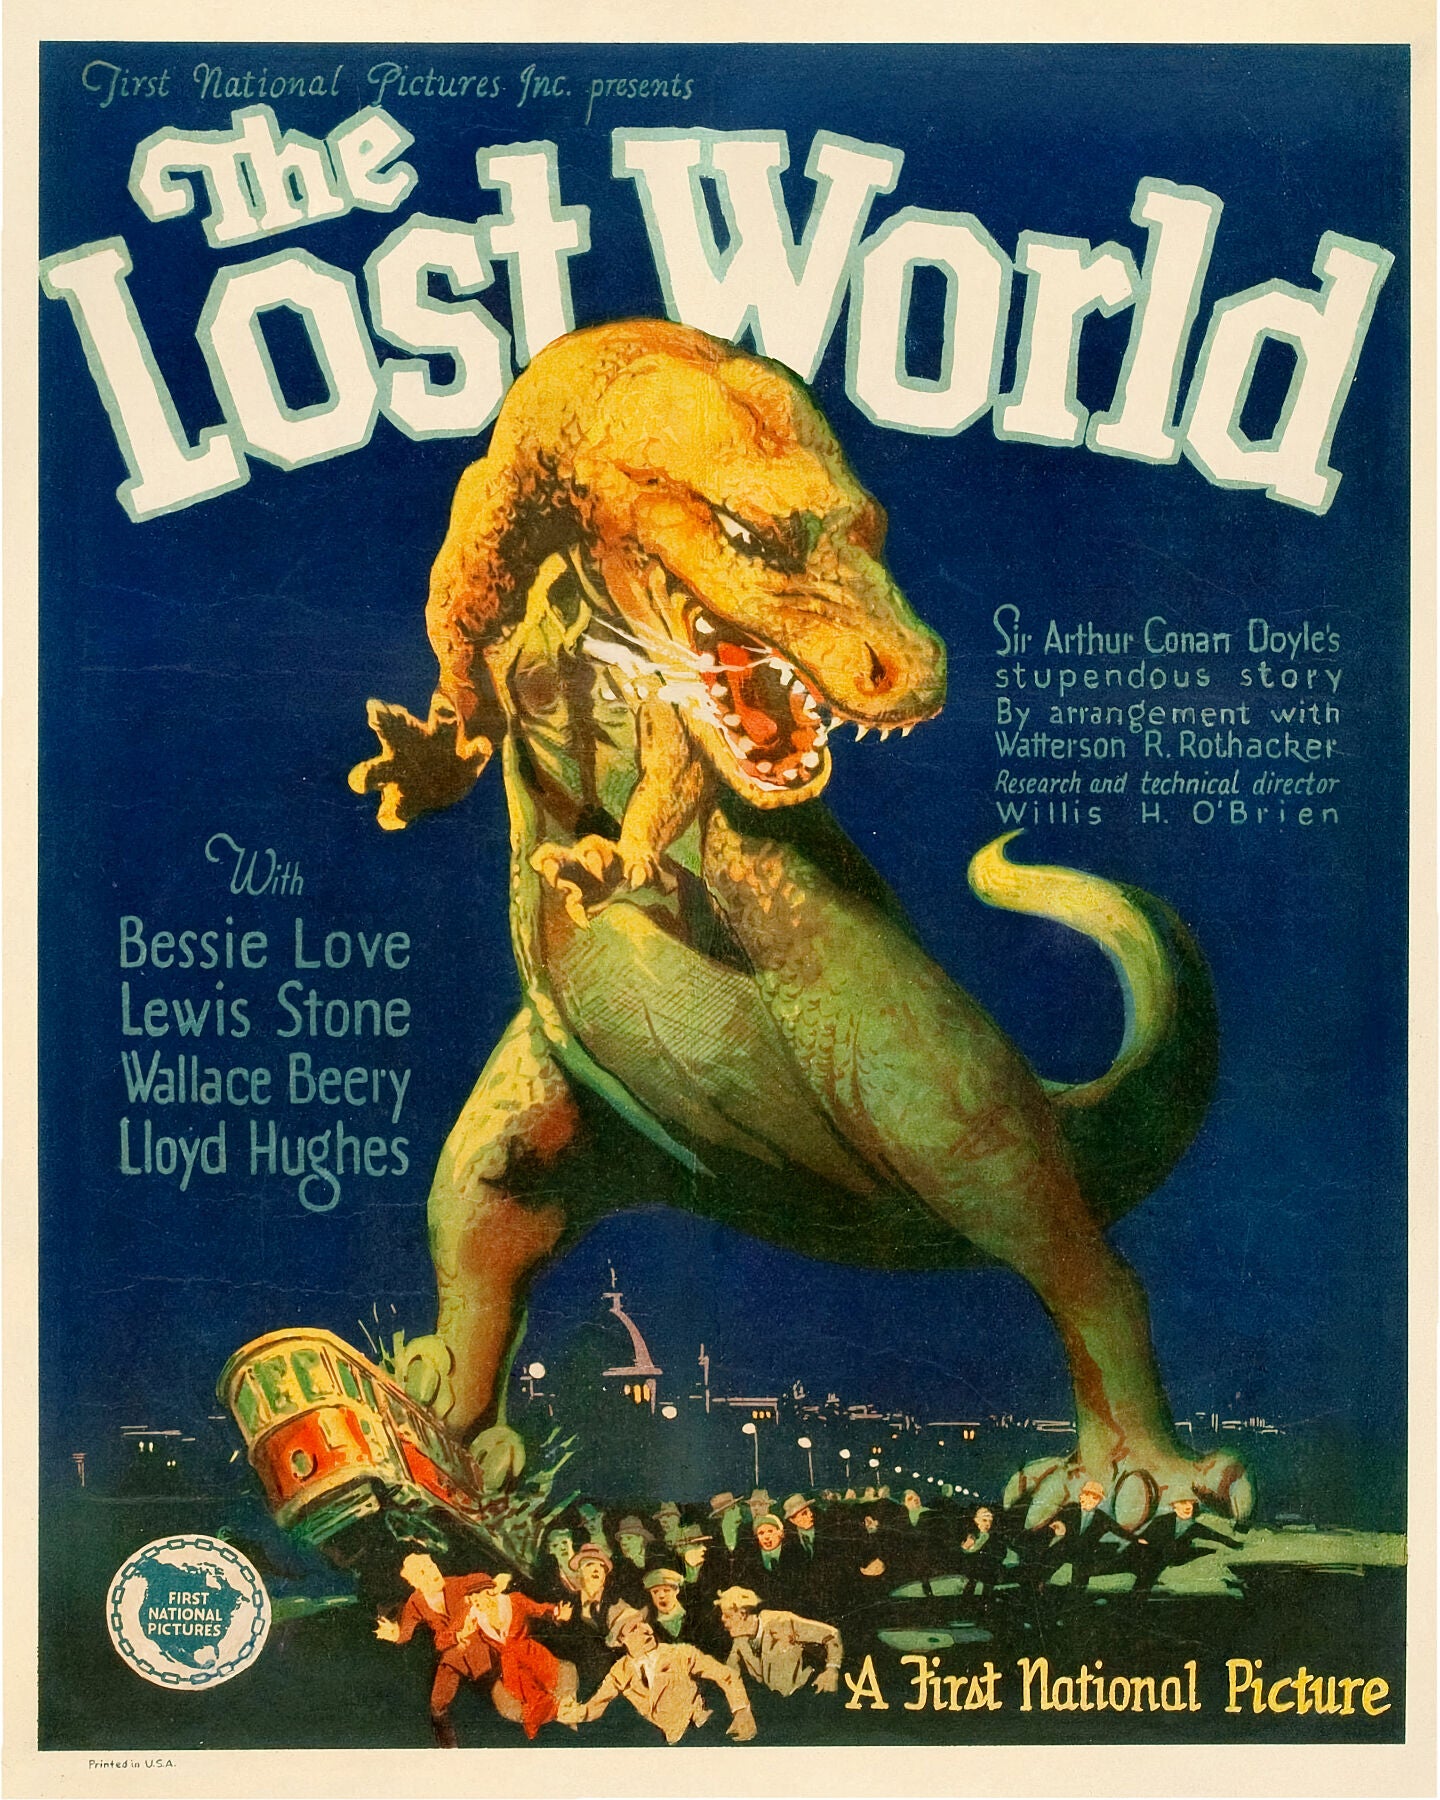 Poster advertising The Lost World movie - 1925.